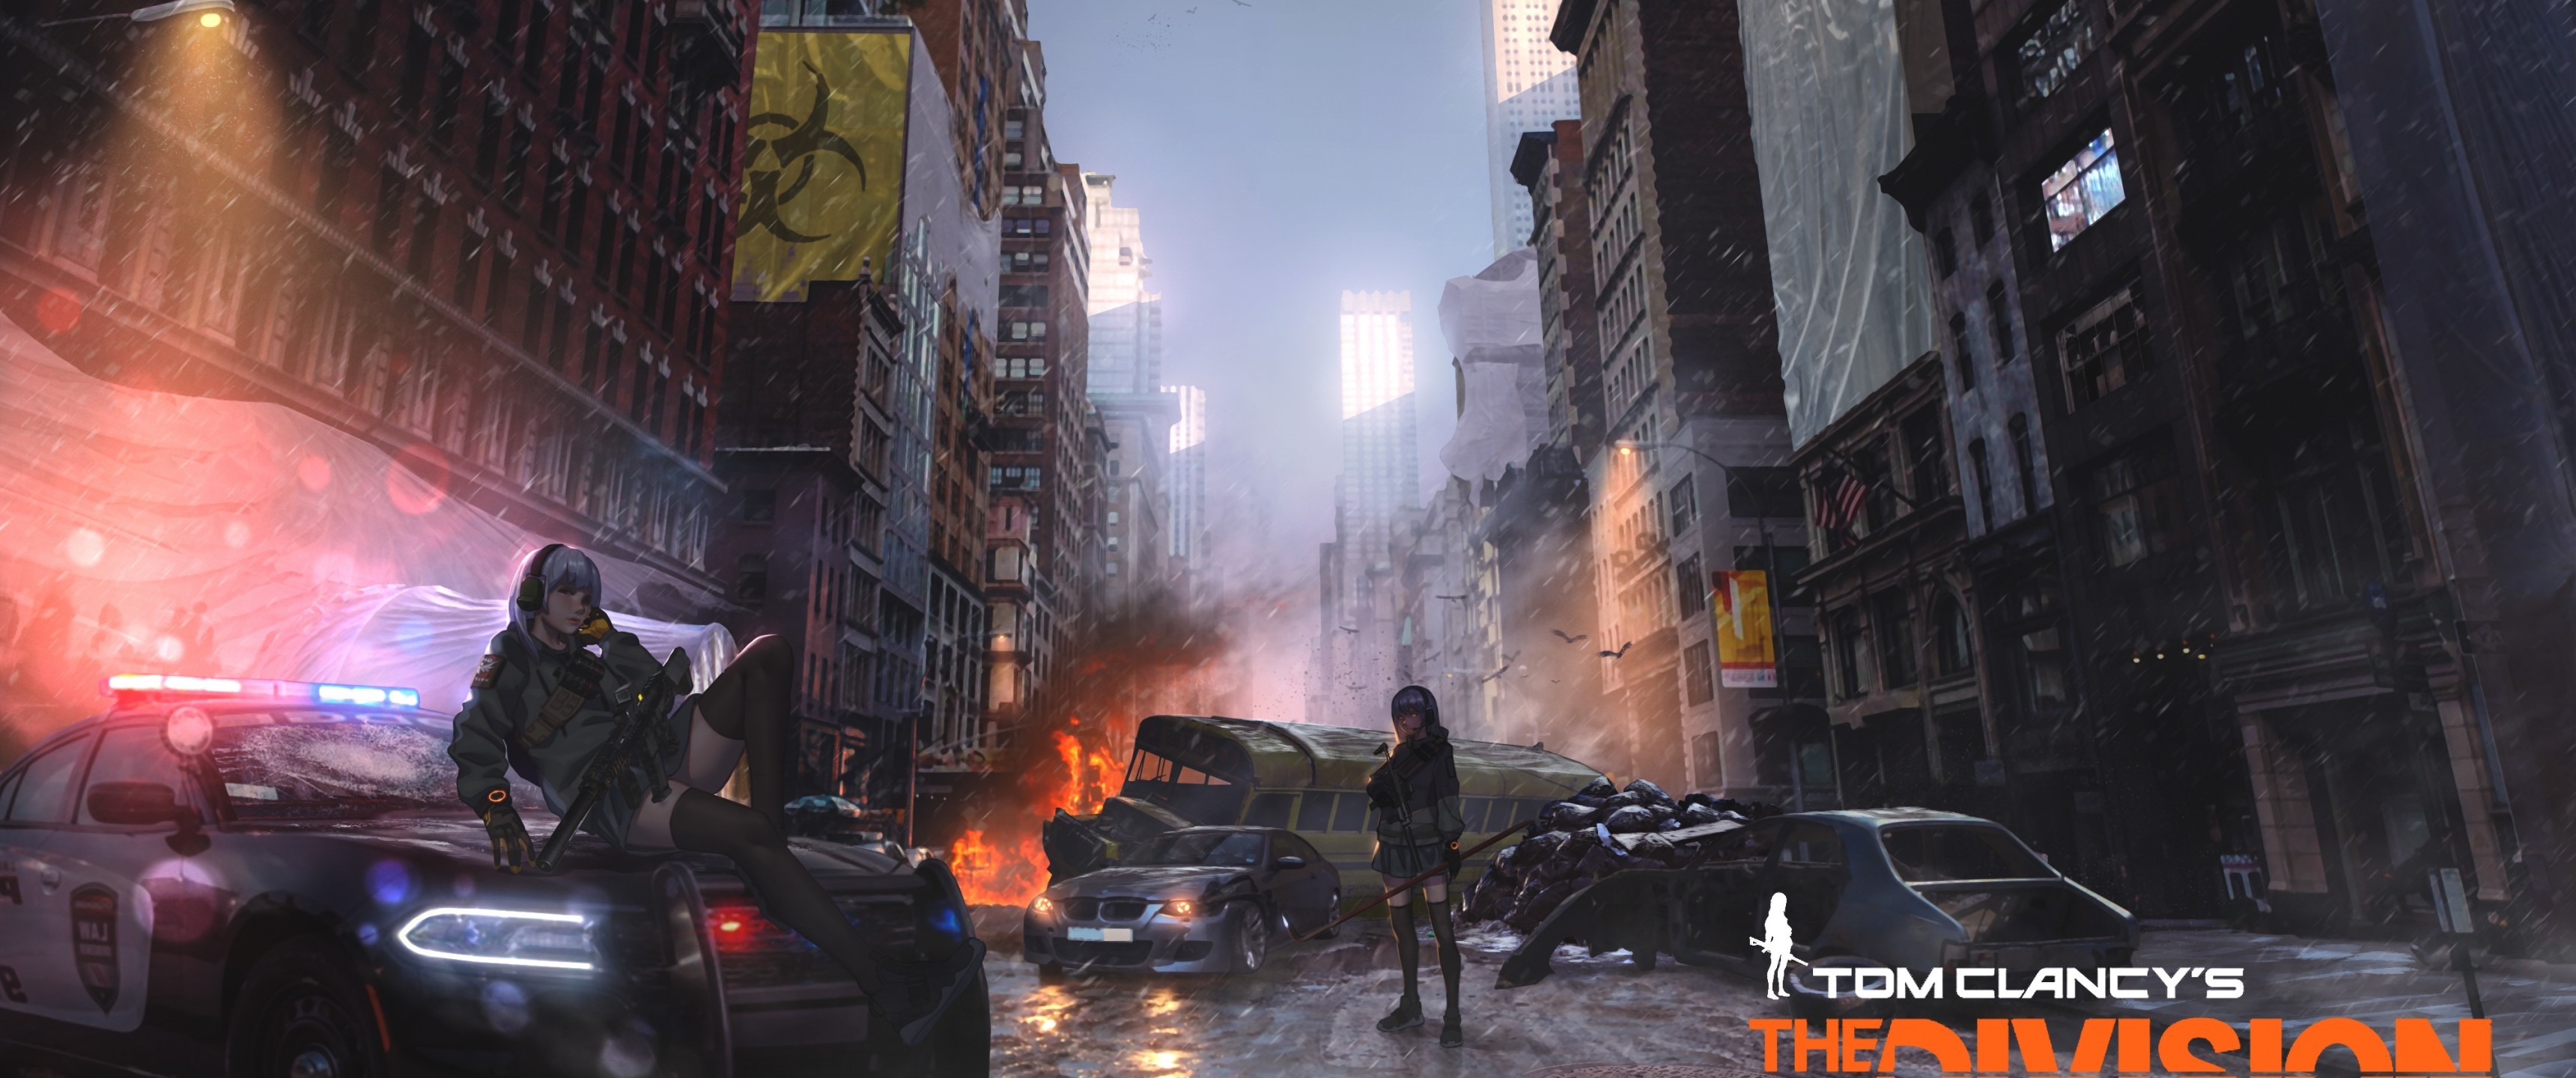 Tom Clancy S The Division, Anime Style, Snow, Street, - Clancy's Ghost Recon Future Soldier - HD Wallpaper 